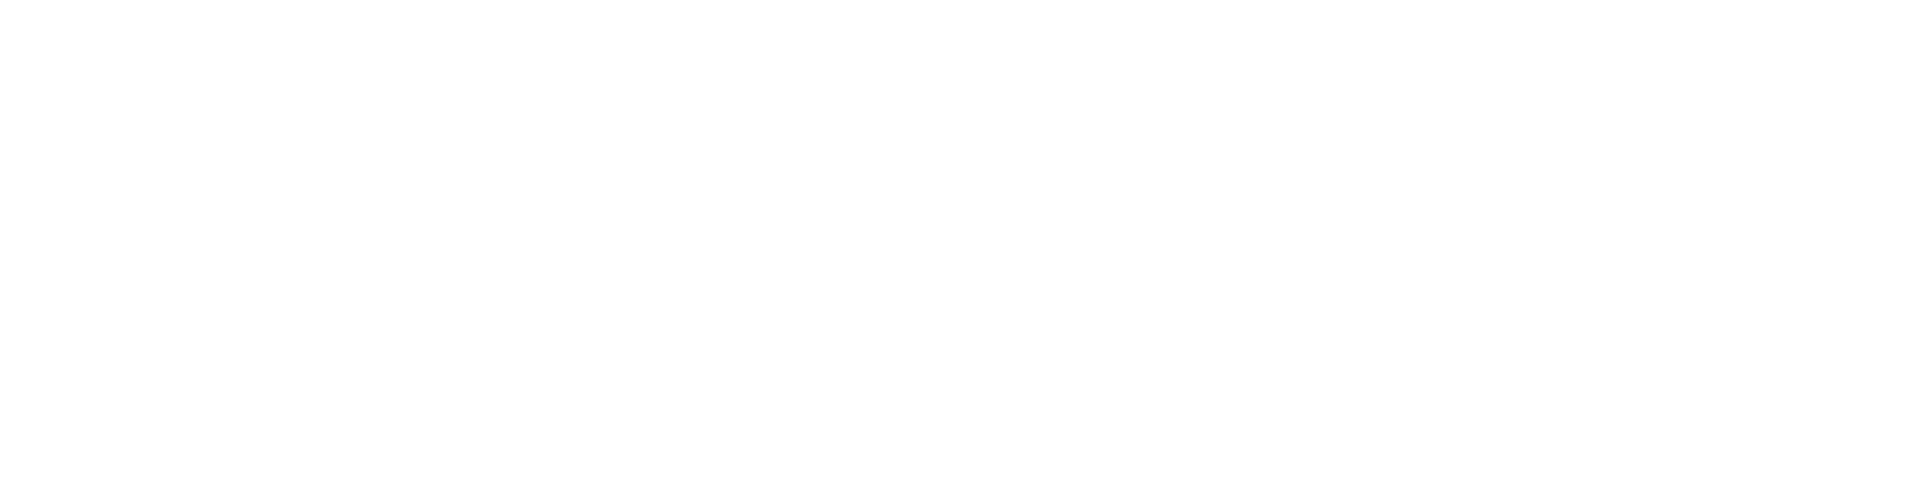 Feel Great Look Good Health and Beauty Supplements and Products